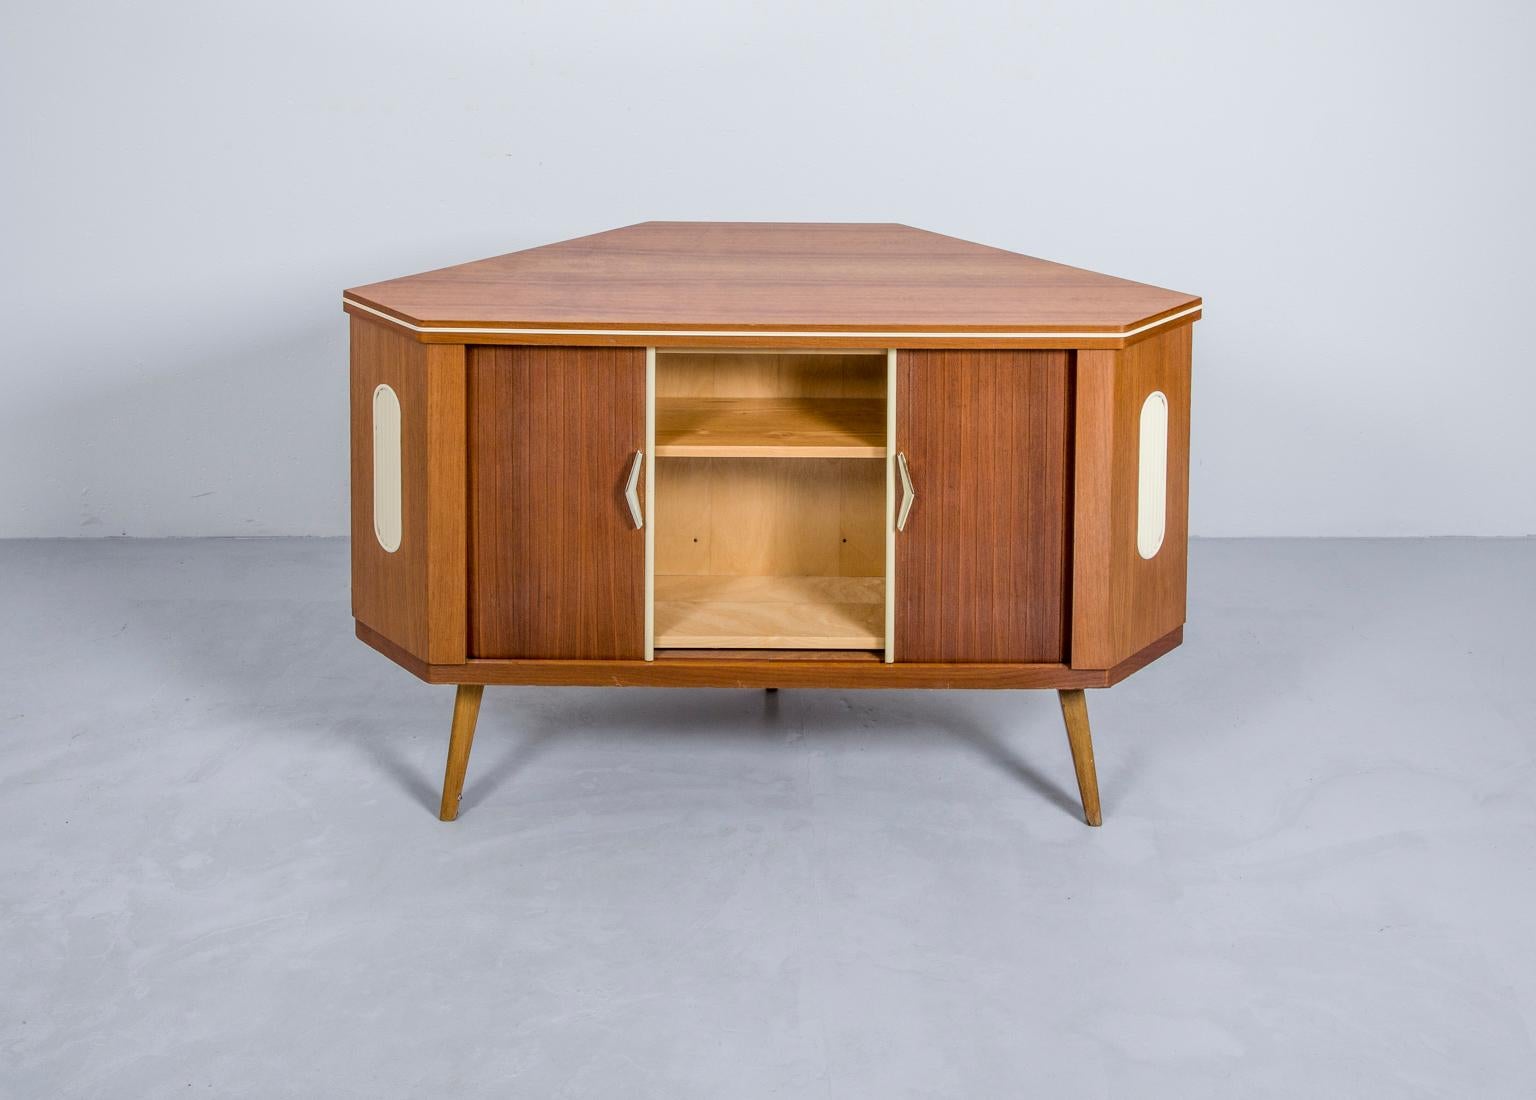 No 1960s home was complete without it’s own bar for those cocktail evenings or unexpected guests so it’s no surprise that some of the most inspiring designs of the time came with a hugely popular Danish inspiration. This bar cabinet features a